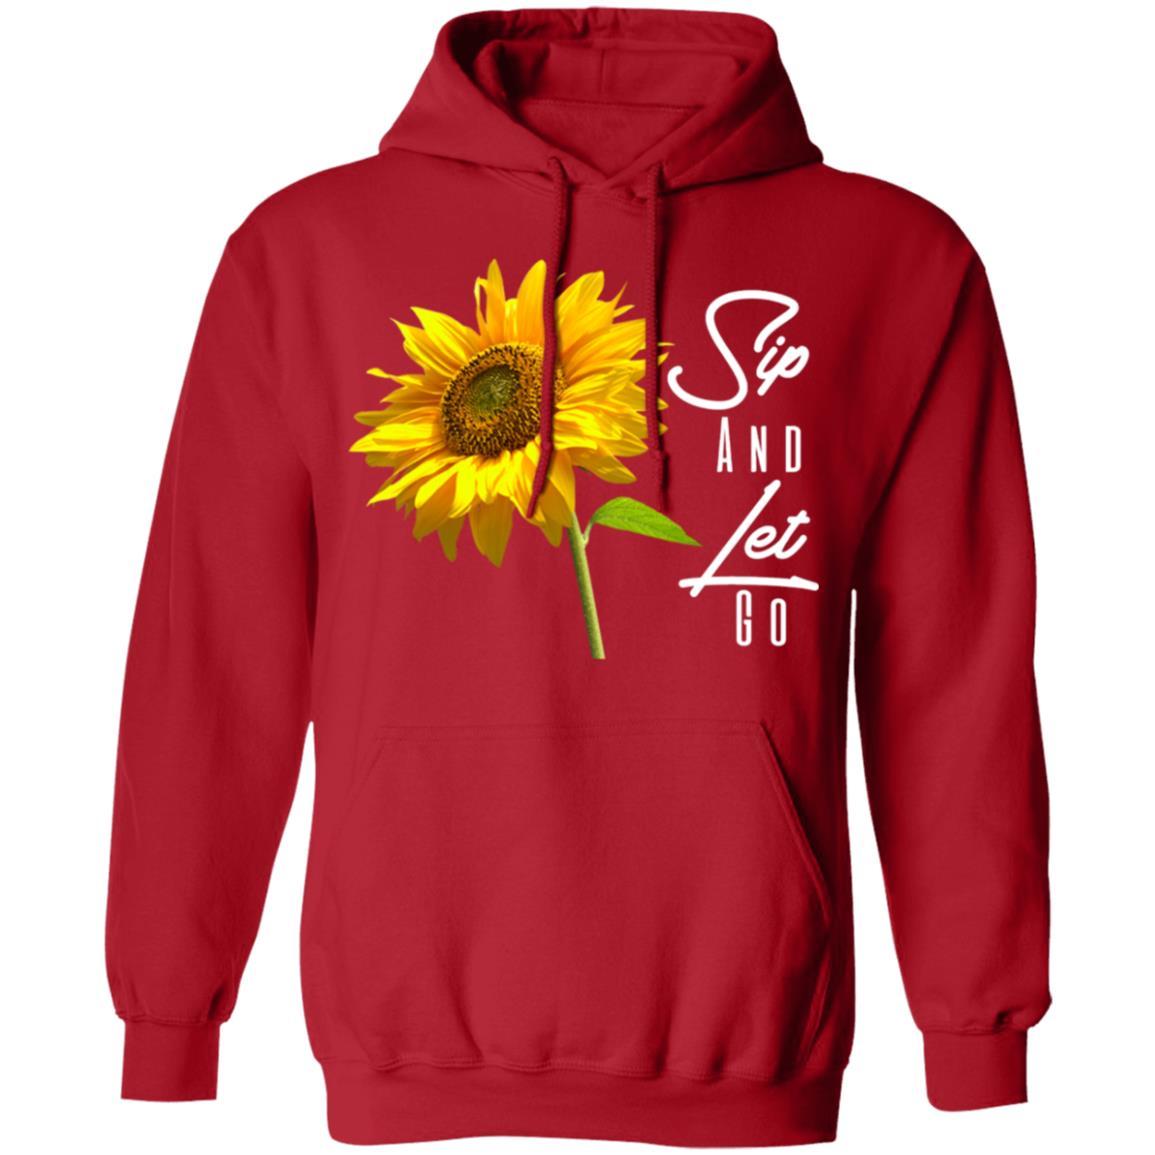 Sip And Let Go Pullover Hoodie - Red - Loyalty Vibes